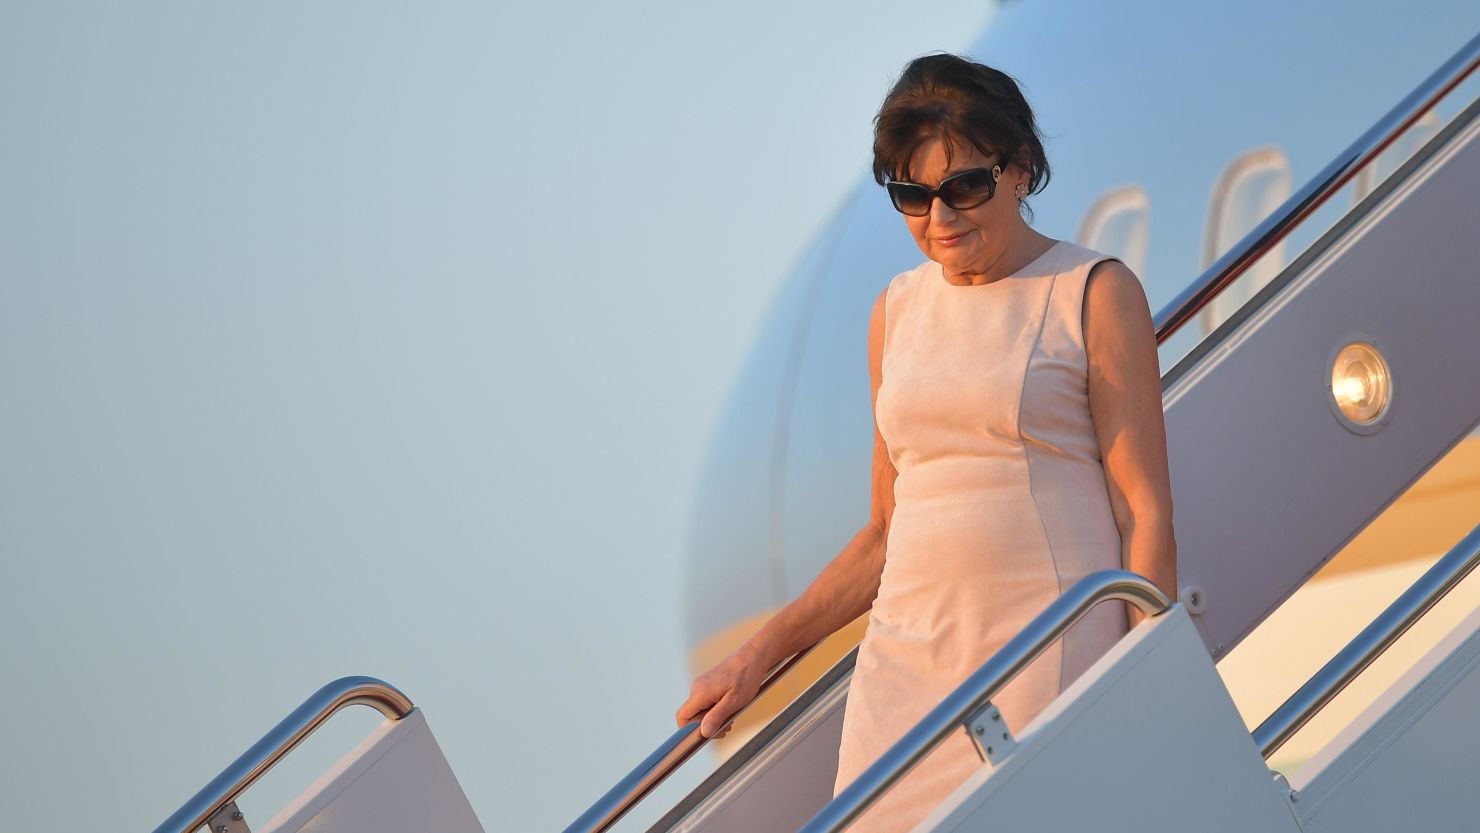 Amalija Knavs, the mother of US First Lady Melania Trump, steps off Air Force One upon arrival at Andrews Air Force Base in Maryland, on June 11, 2017. - Knavs arrived in Washington with US President Donald Trump who spent the weekend at his Bedminster, New Jersey golf club. (Photo by MANDEL NGAN / AFP)        (Photo credit should read MANDEL NGAN/AFP via Getty Images)